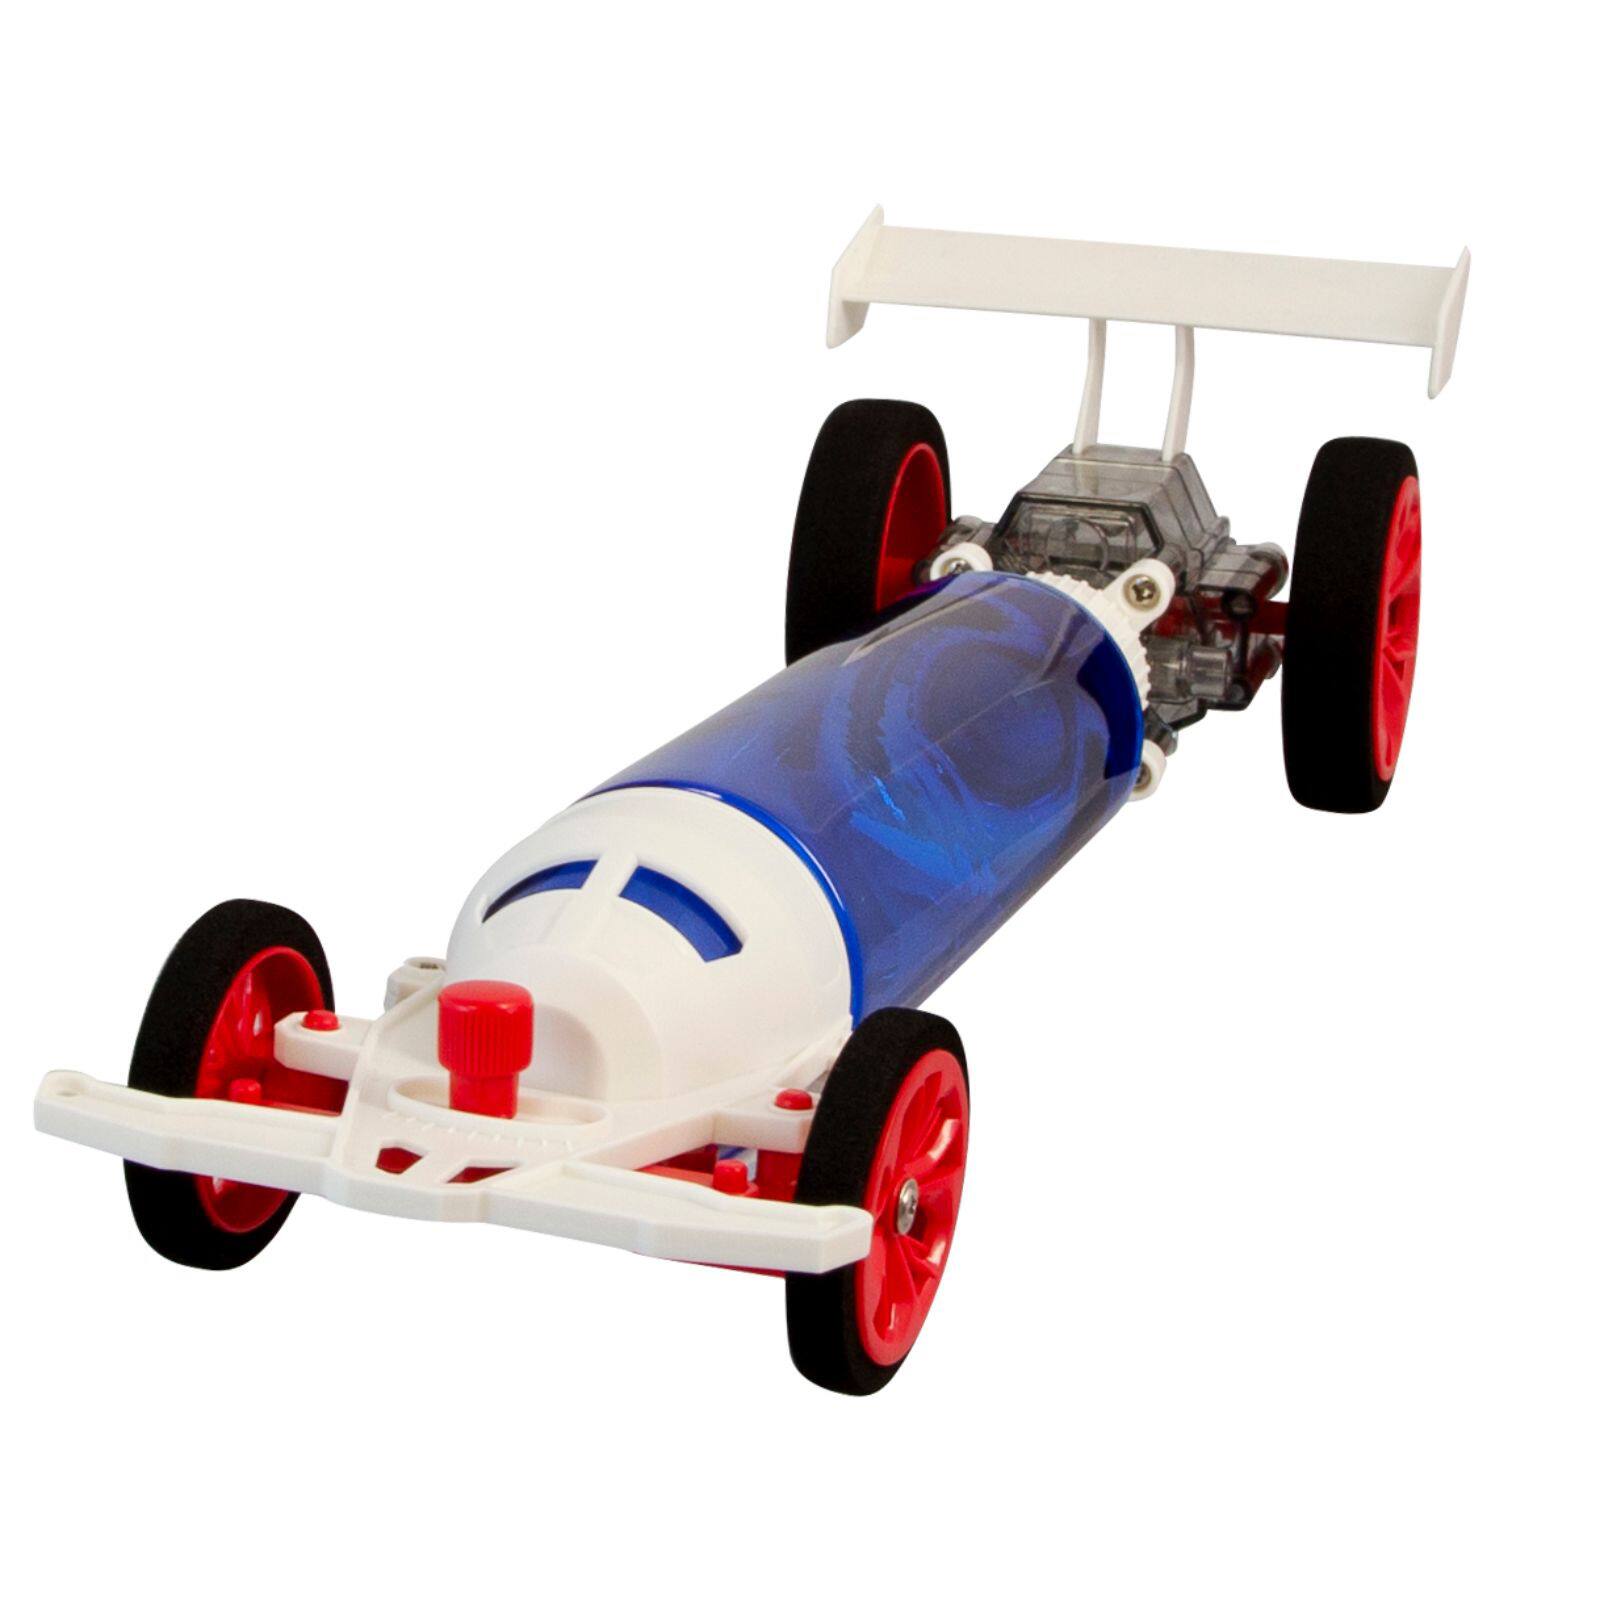 DISCOVERY TURBO AIR RACER DIY AIR-POWERED DRAGSTER KIT 